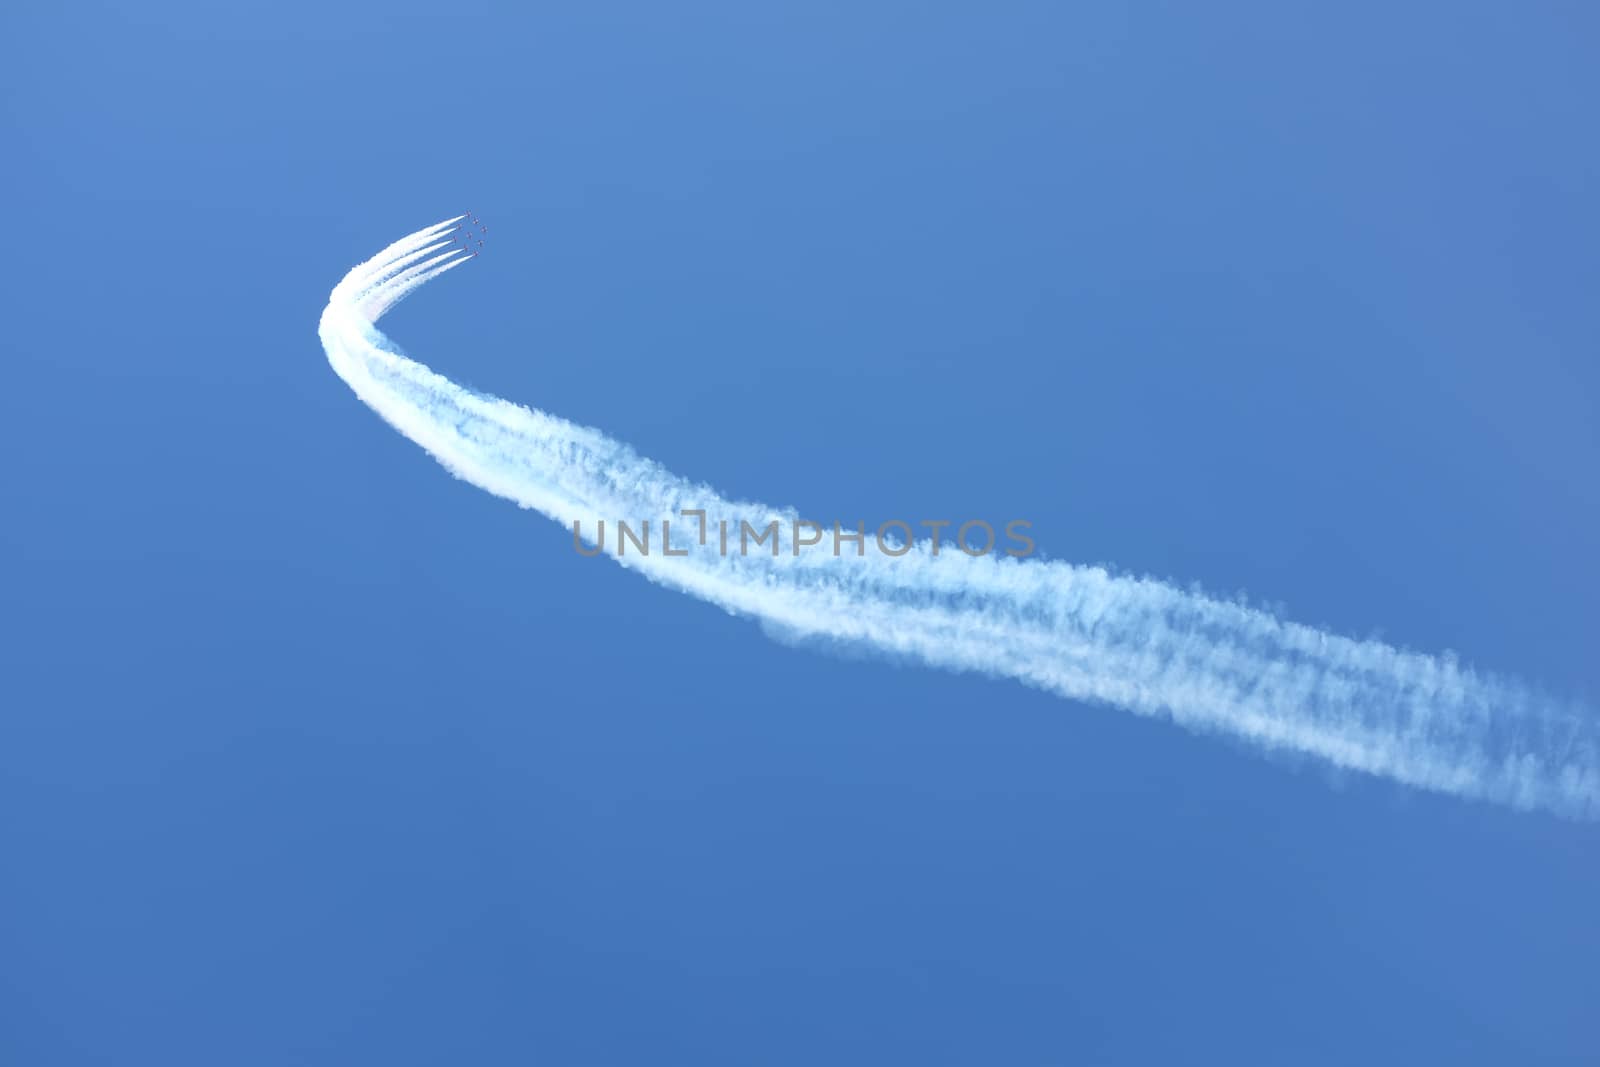 Vapour trails lead to a formation of red jet aircraft in display formation against a clear blue sky.